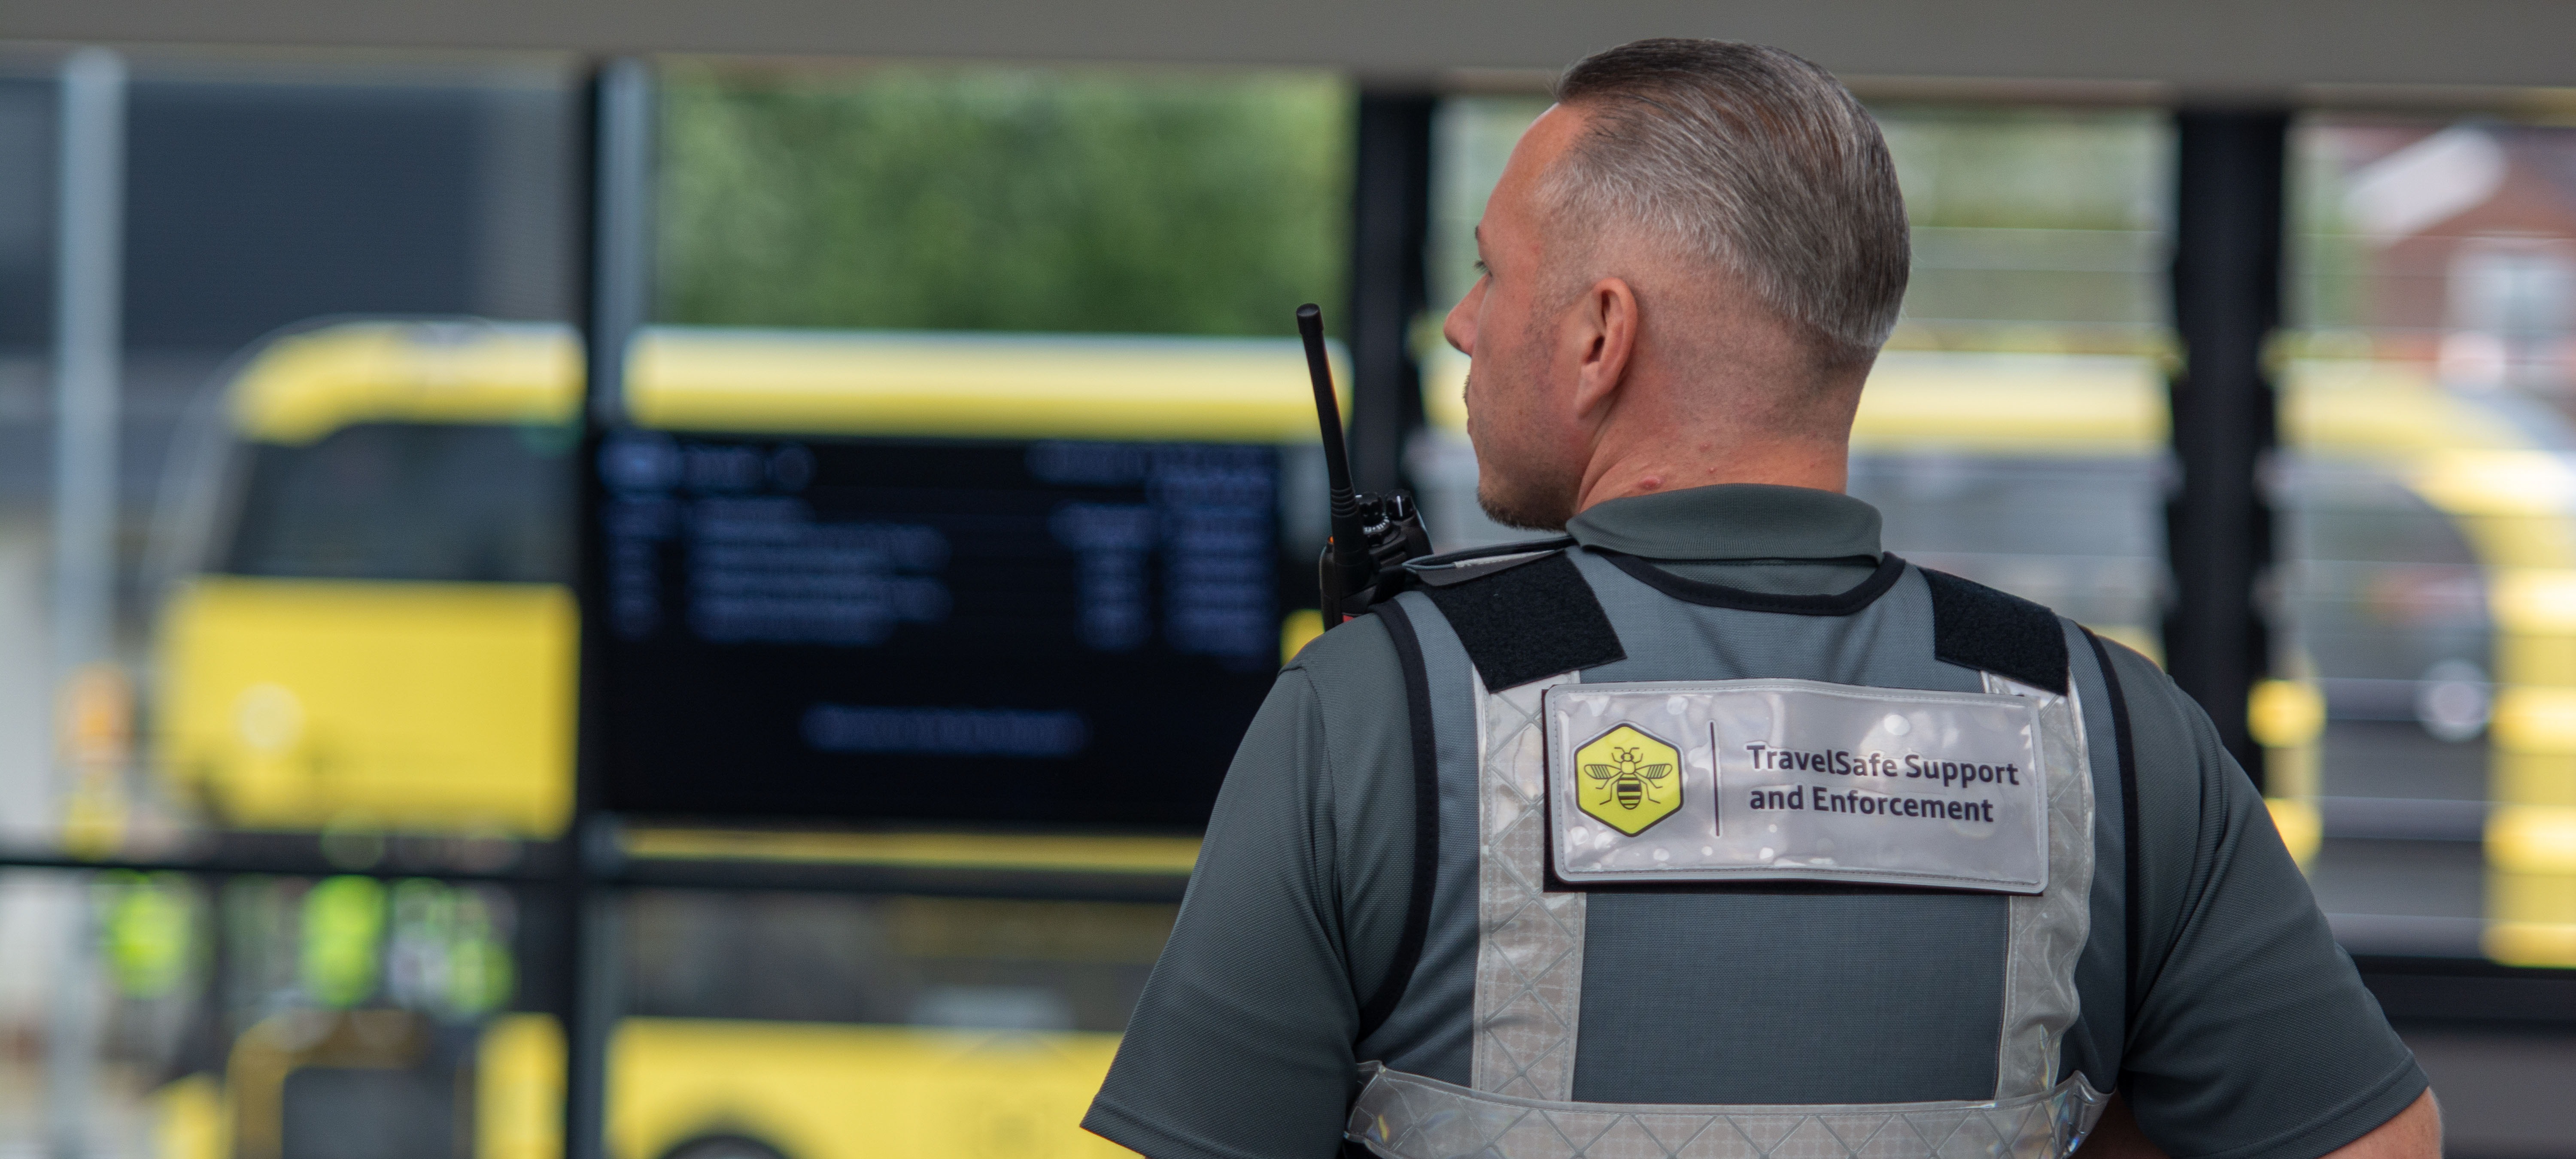 Travelsafe officer stood in front of a bee network bus